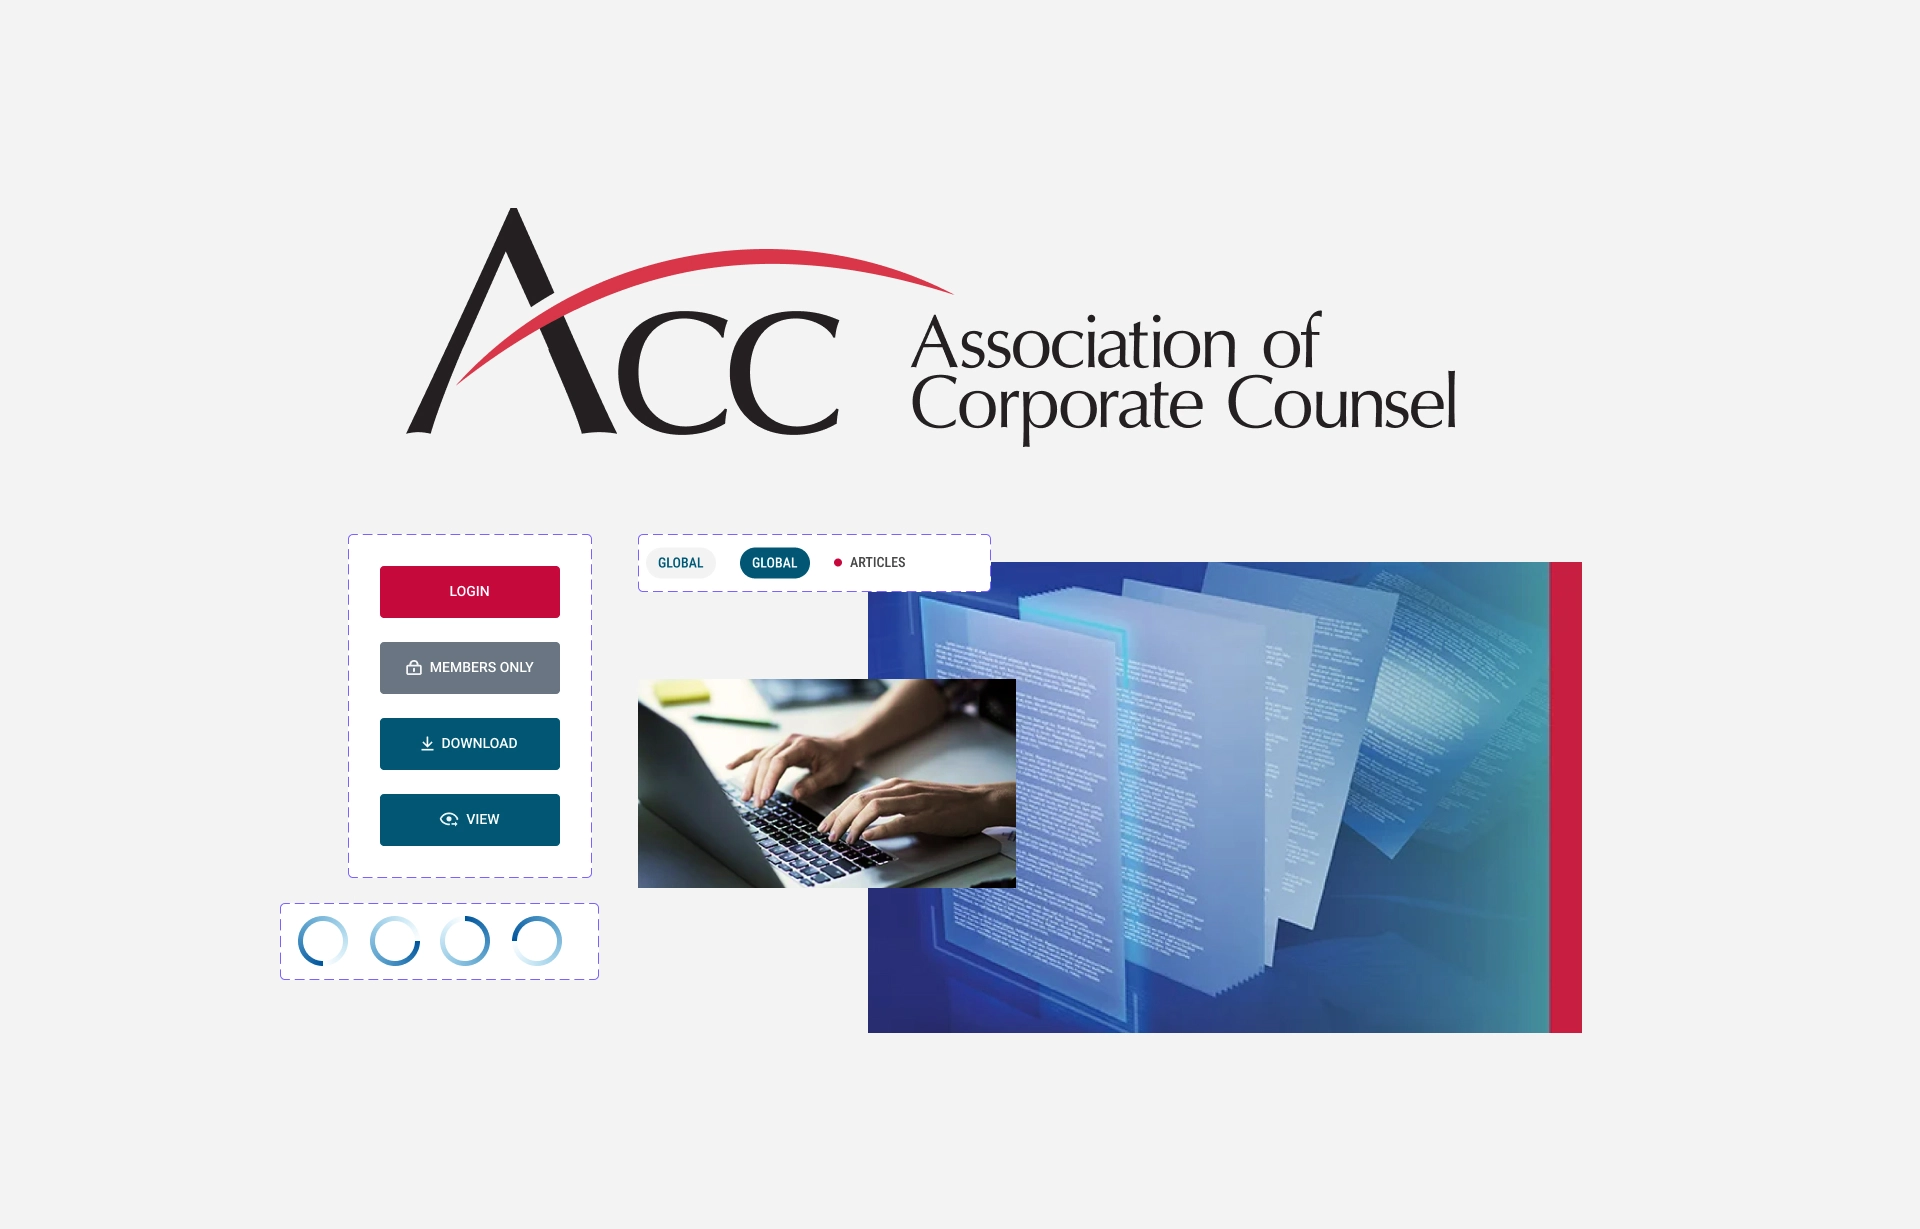 Collage of UI elements related to the Association of Corporate Counsel featuring a logo, search interface, member login, and images of a person working on a laptop and documents.